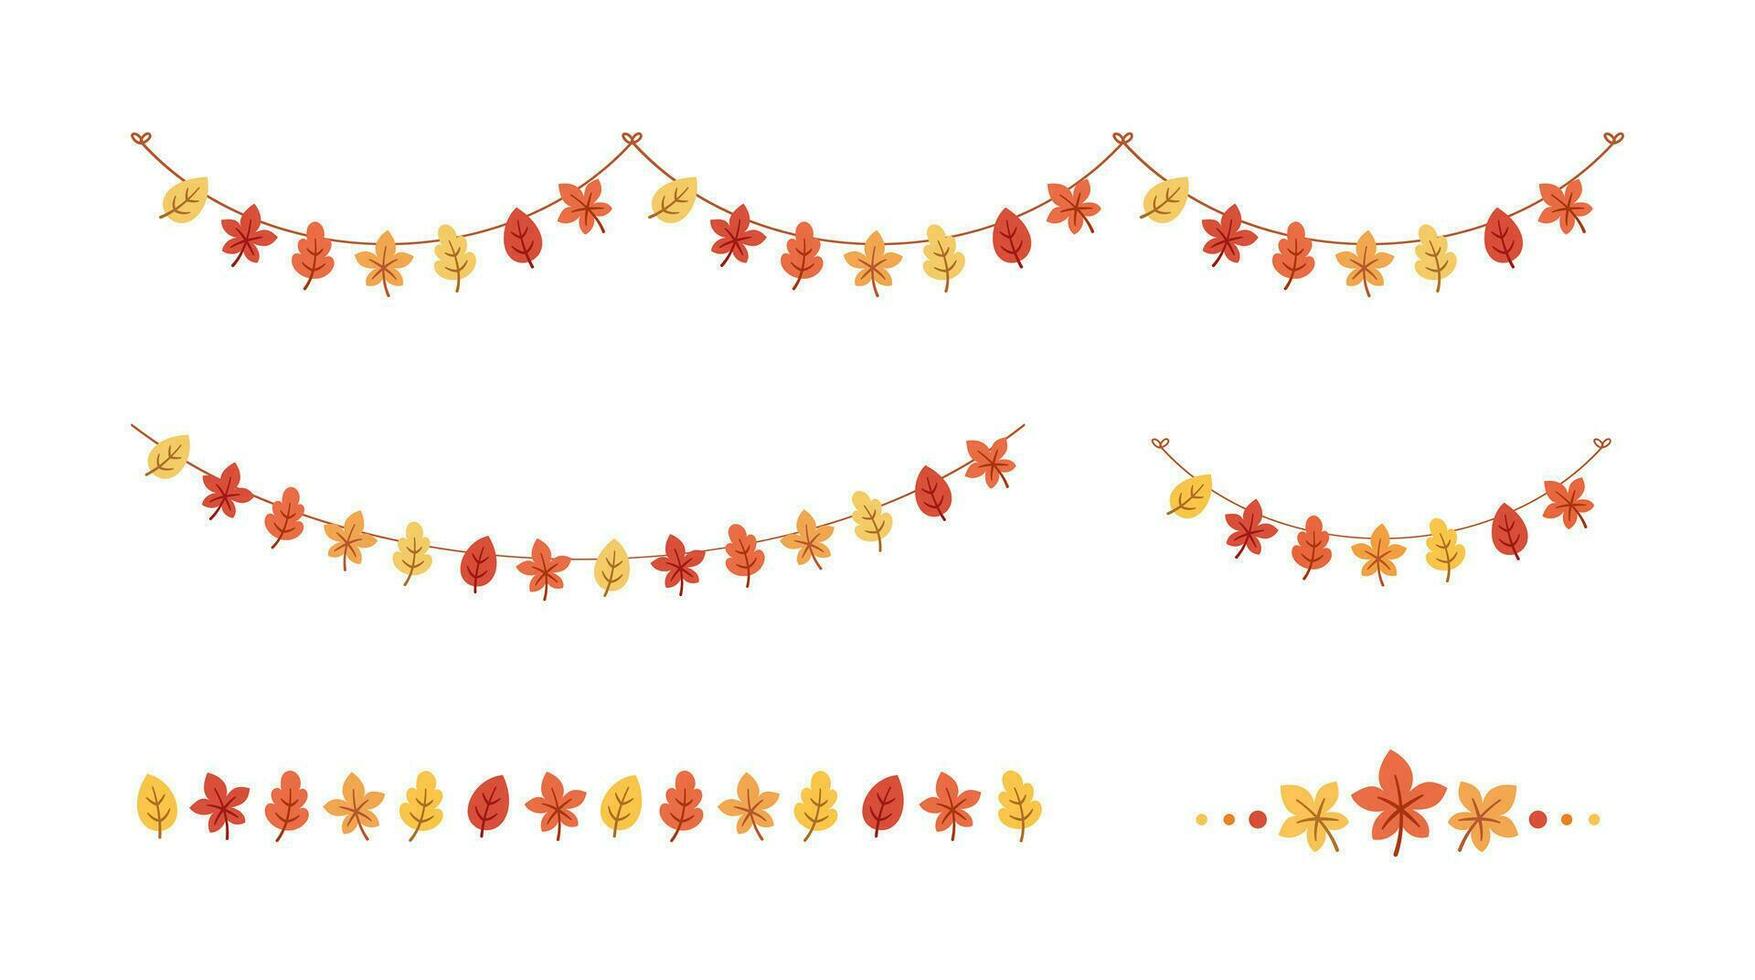 Autumn garlands and borders design elements set. Fall Thanksgiving themed graphics collection. Vector illustration.